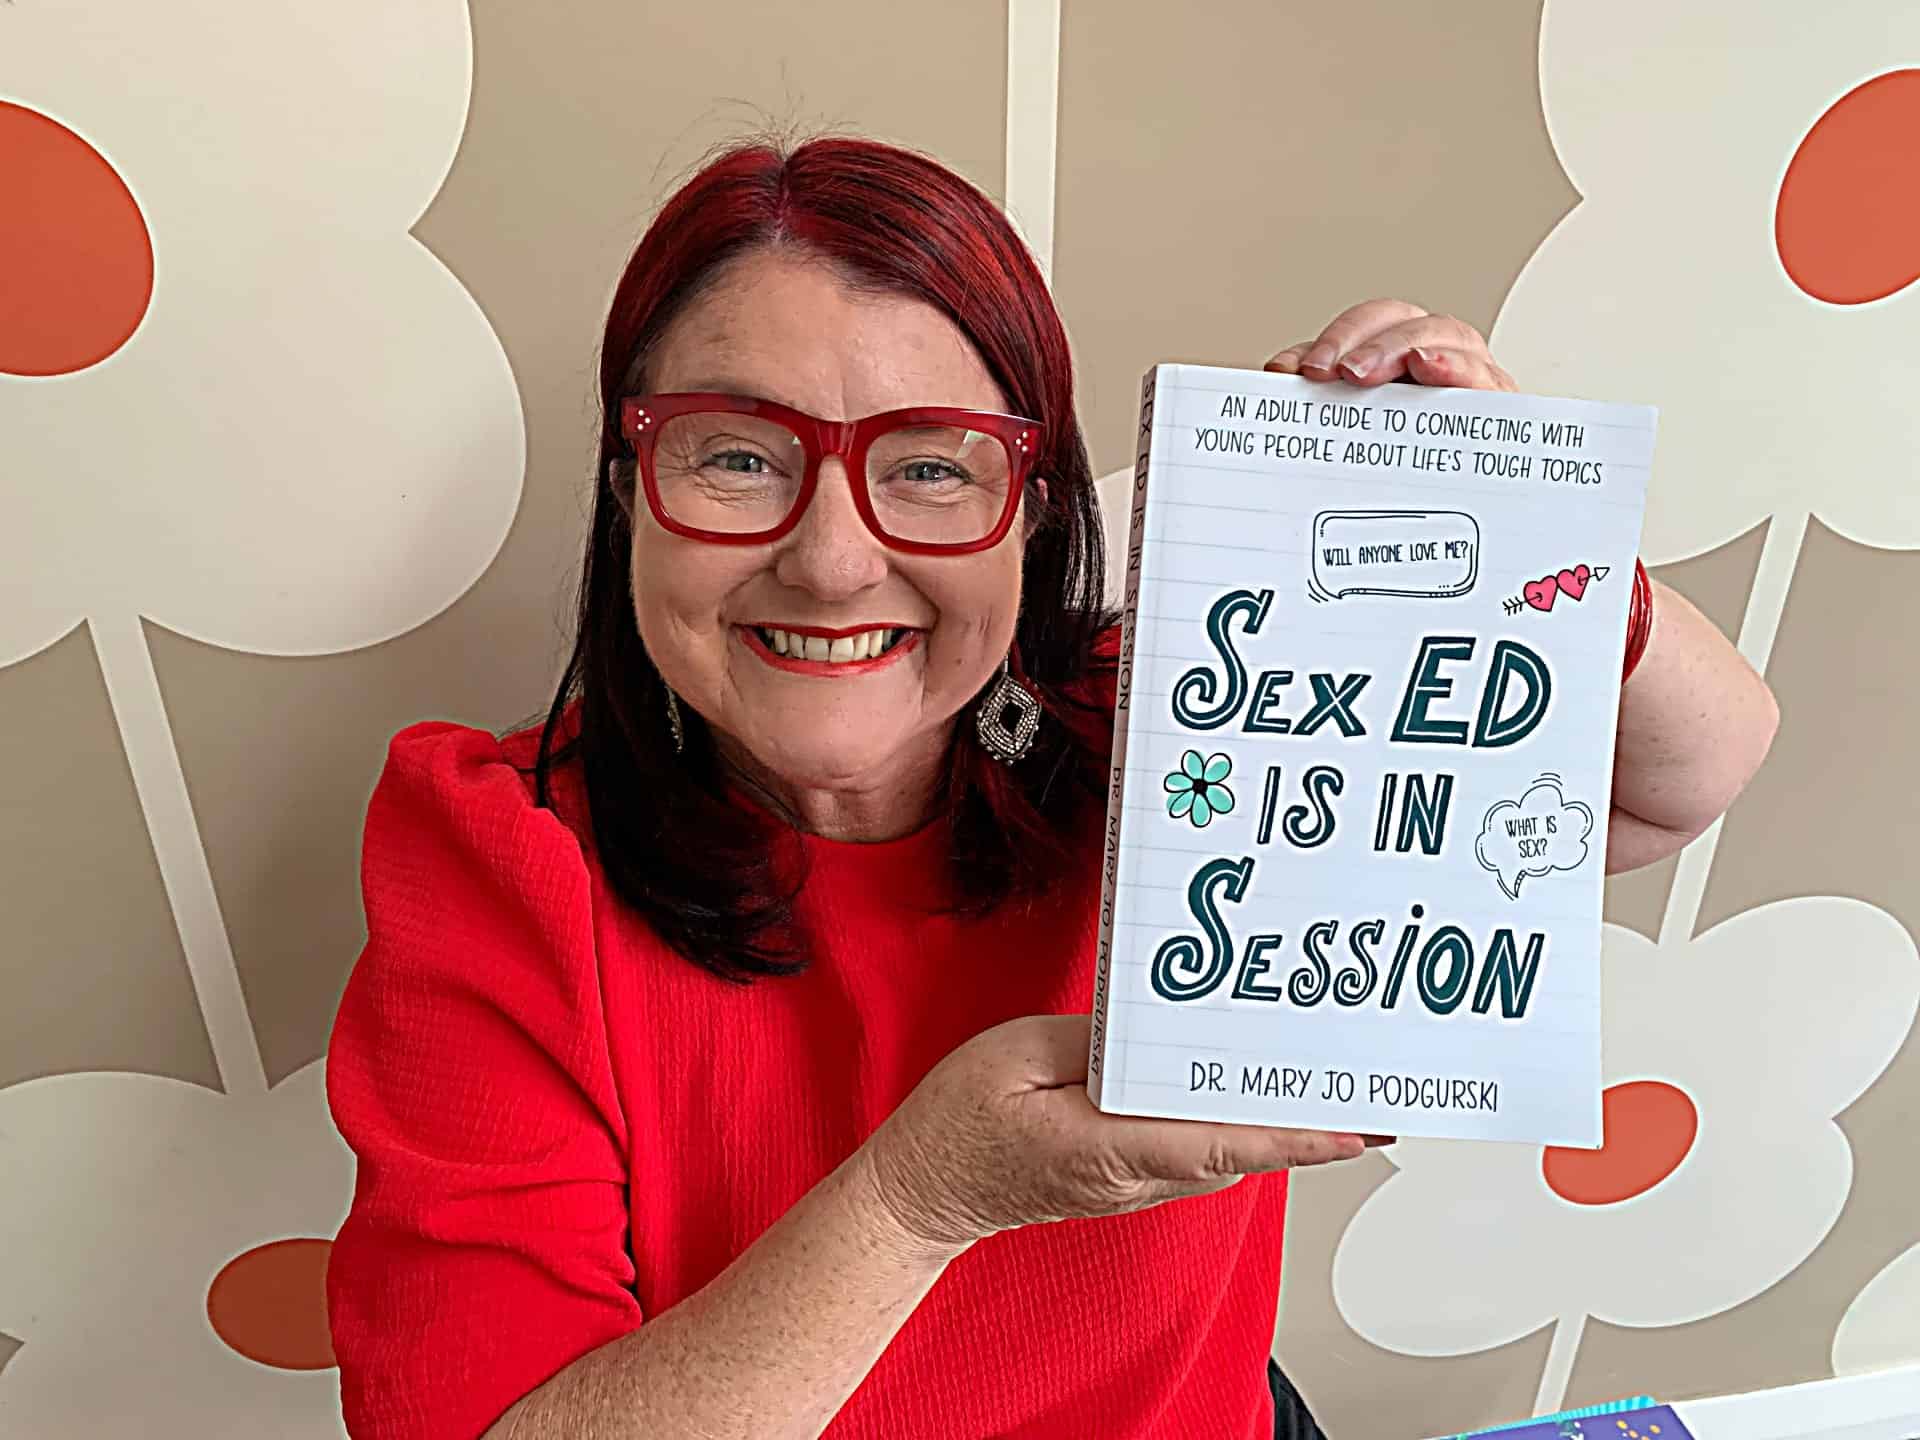 Sex Ed is in Session - Book review by Rowena Thomas | 'Amazing Me'